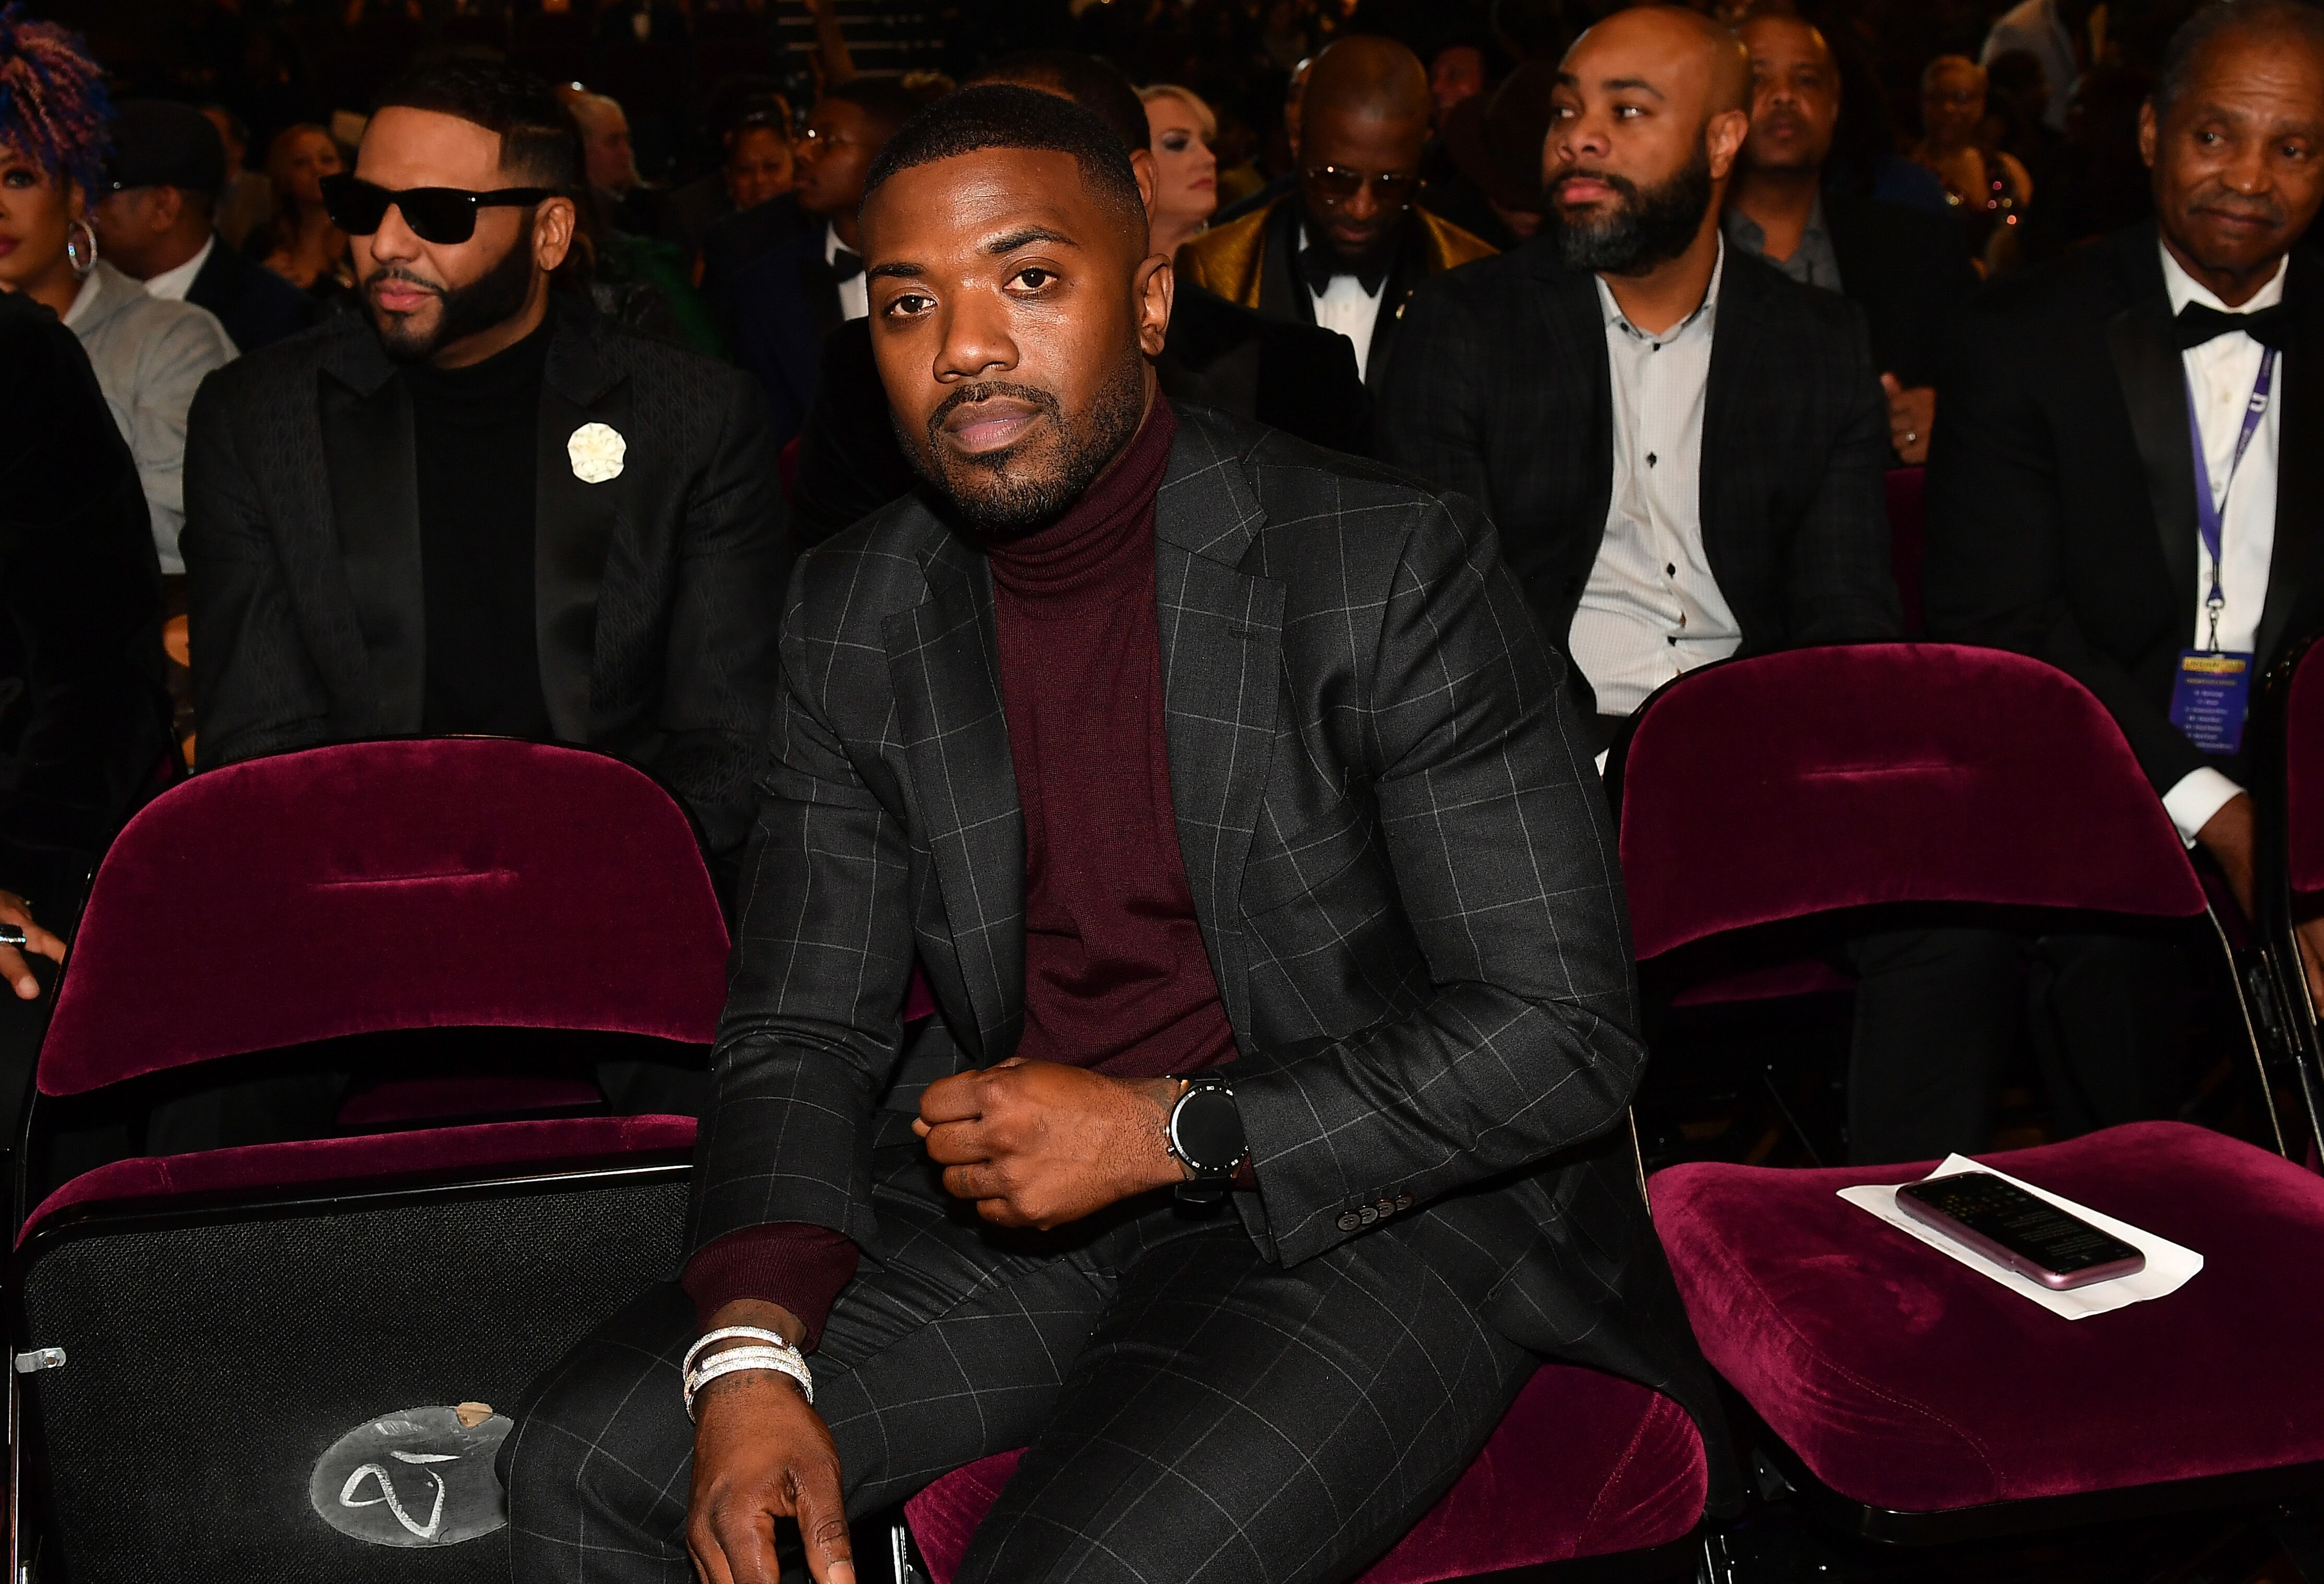 Ray J attends an awards show | Source: Getty Images/GlobalImagesUkraine